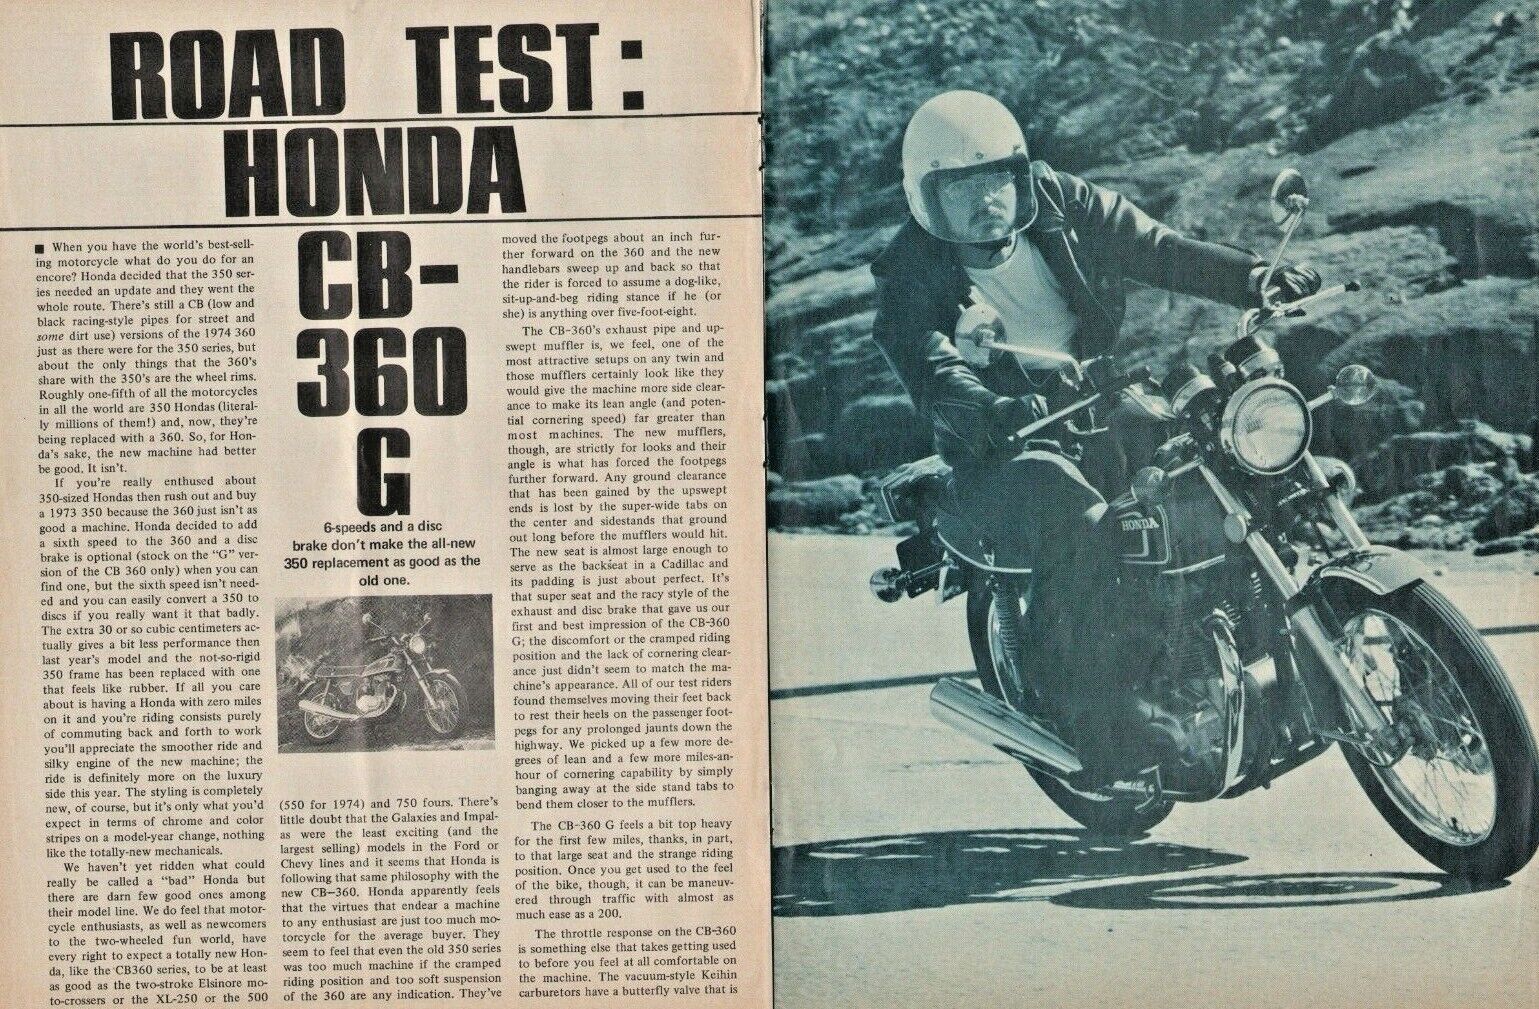 1974 Honda CB360G - 6-Page Vintage Motorcycle Road Test Article